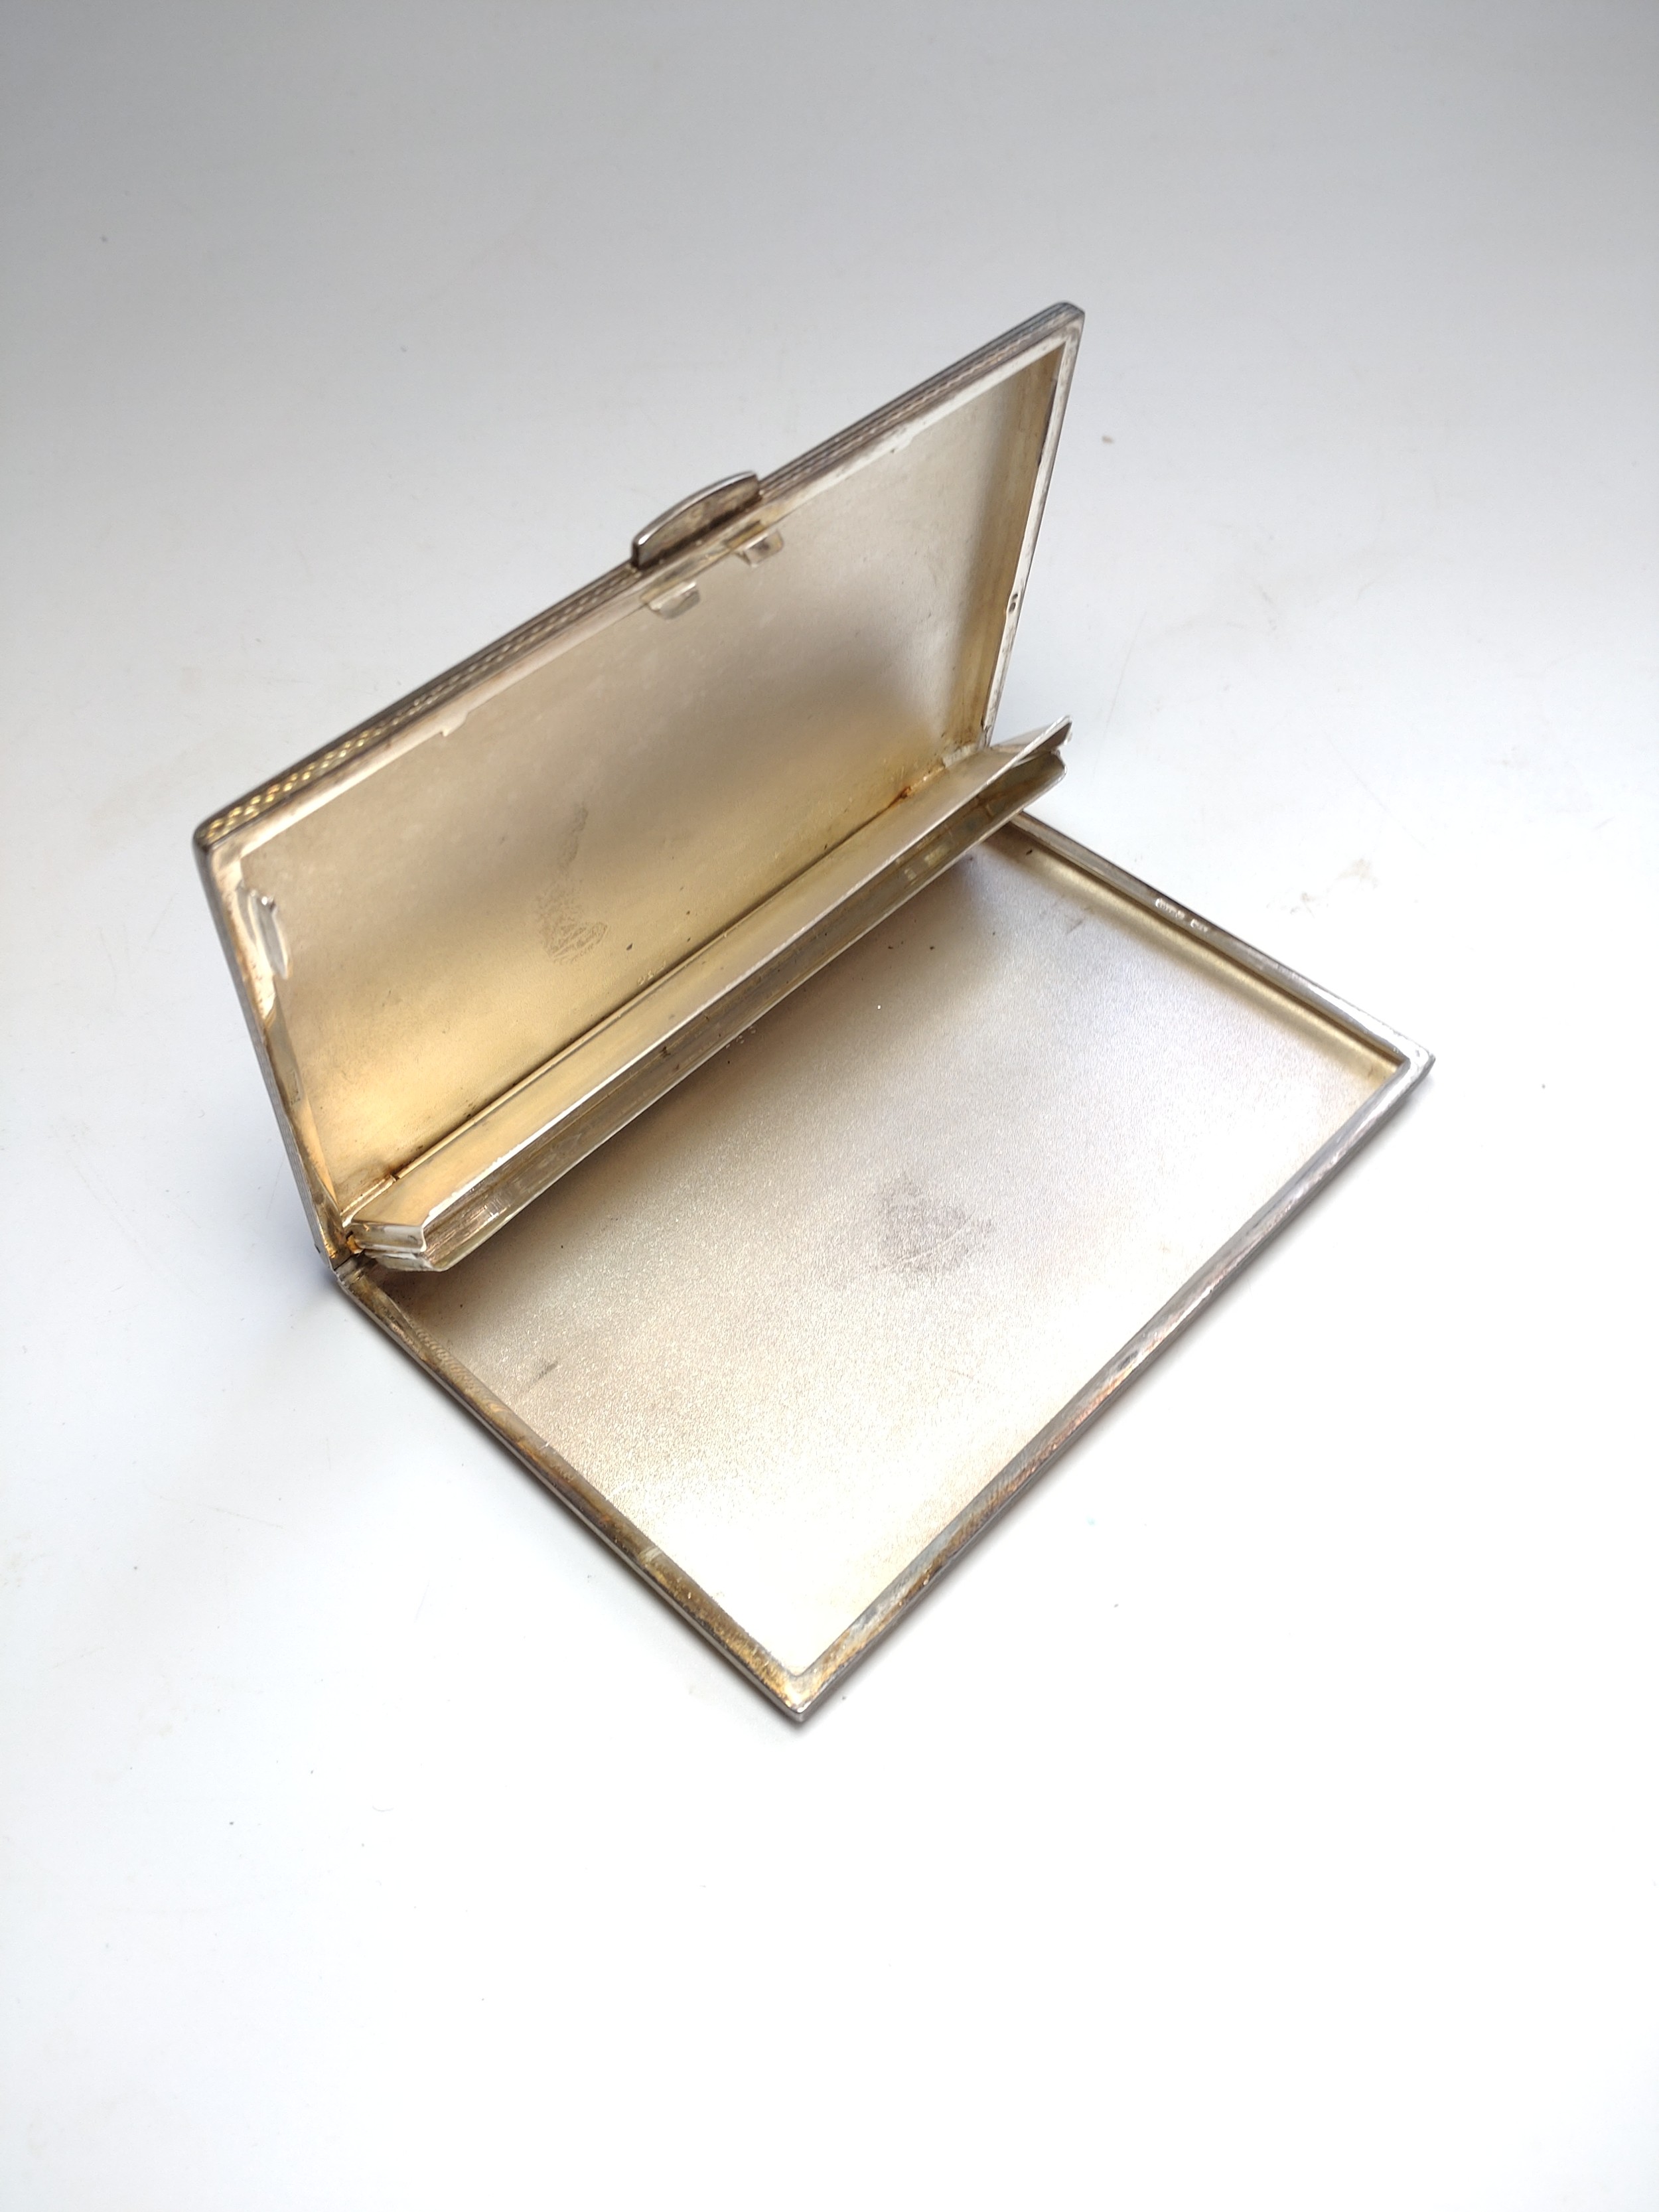 A Sterling silver cigarette case. Import marks. circa 1930. Engine turned decoration.